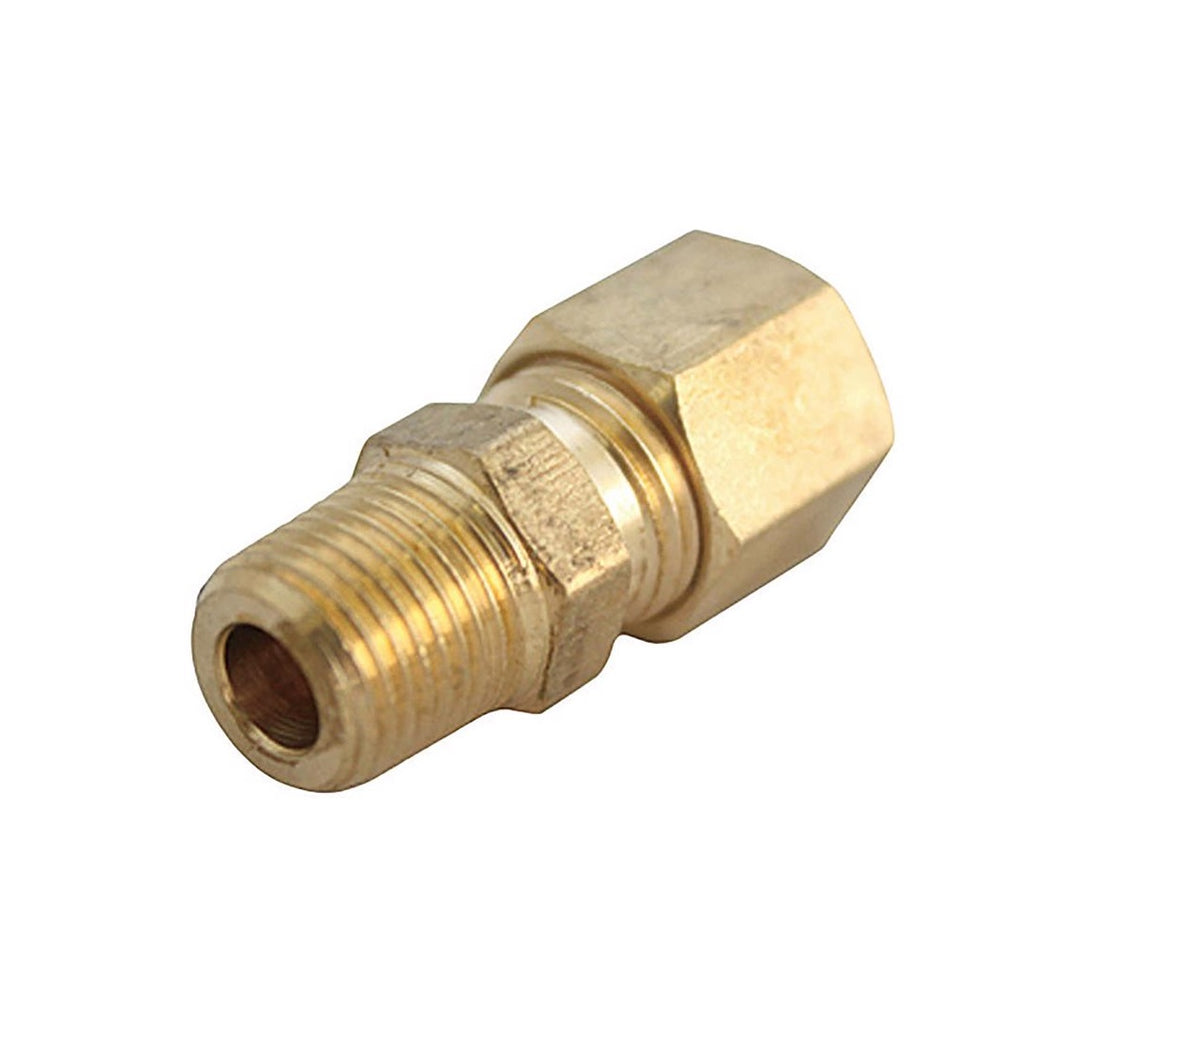 Homeplus+ 6JC120110701015 MPT Brass Connector, 1/4 inches X 3/8 inches